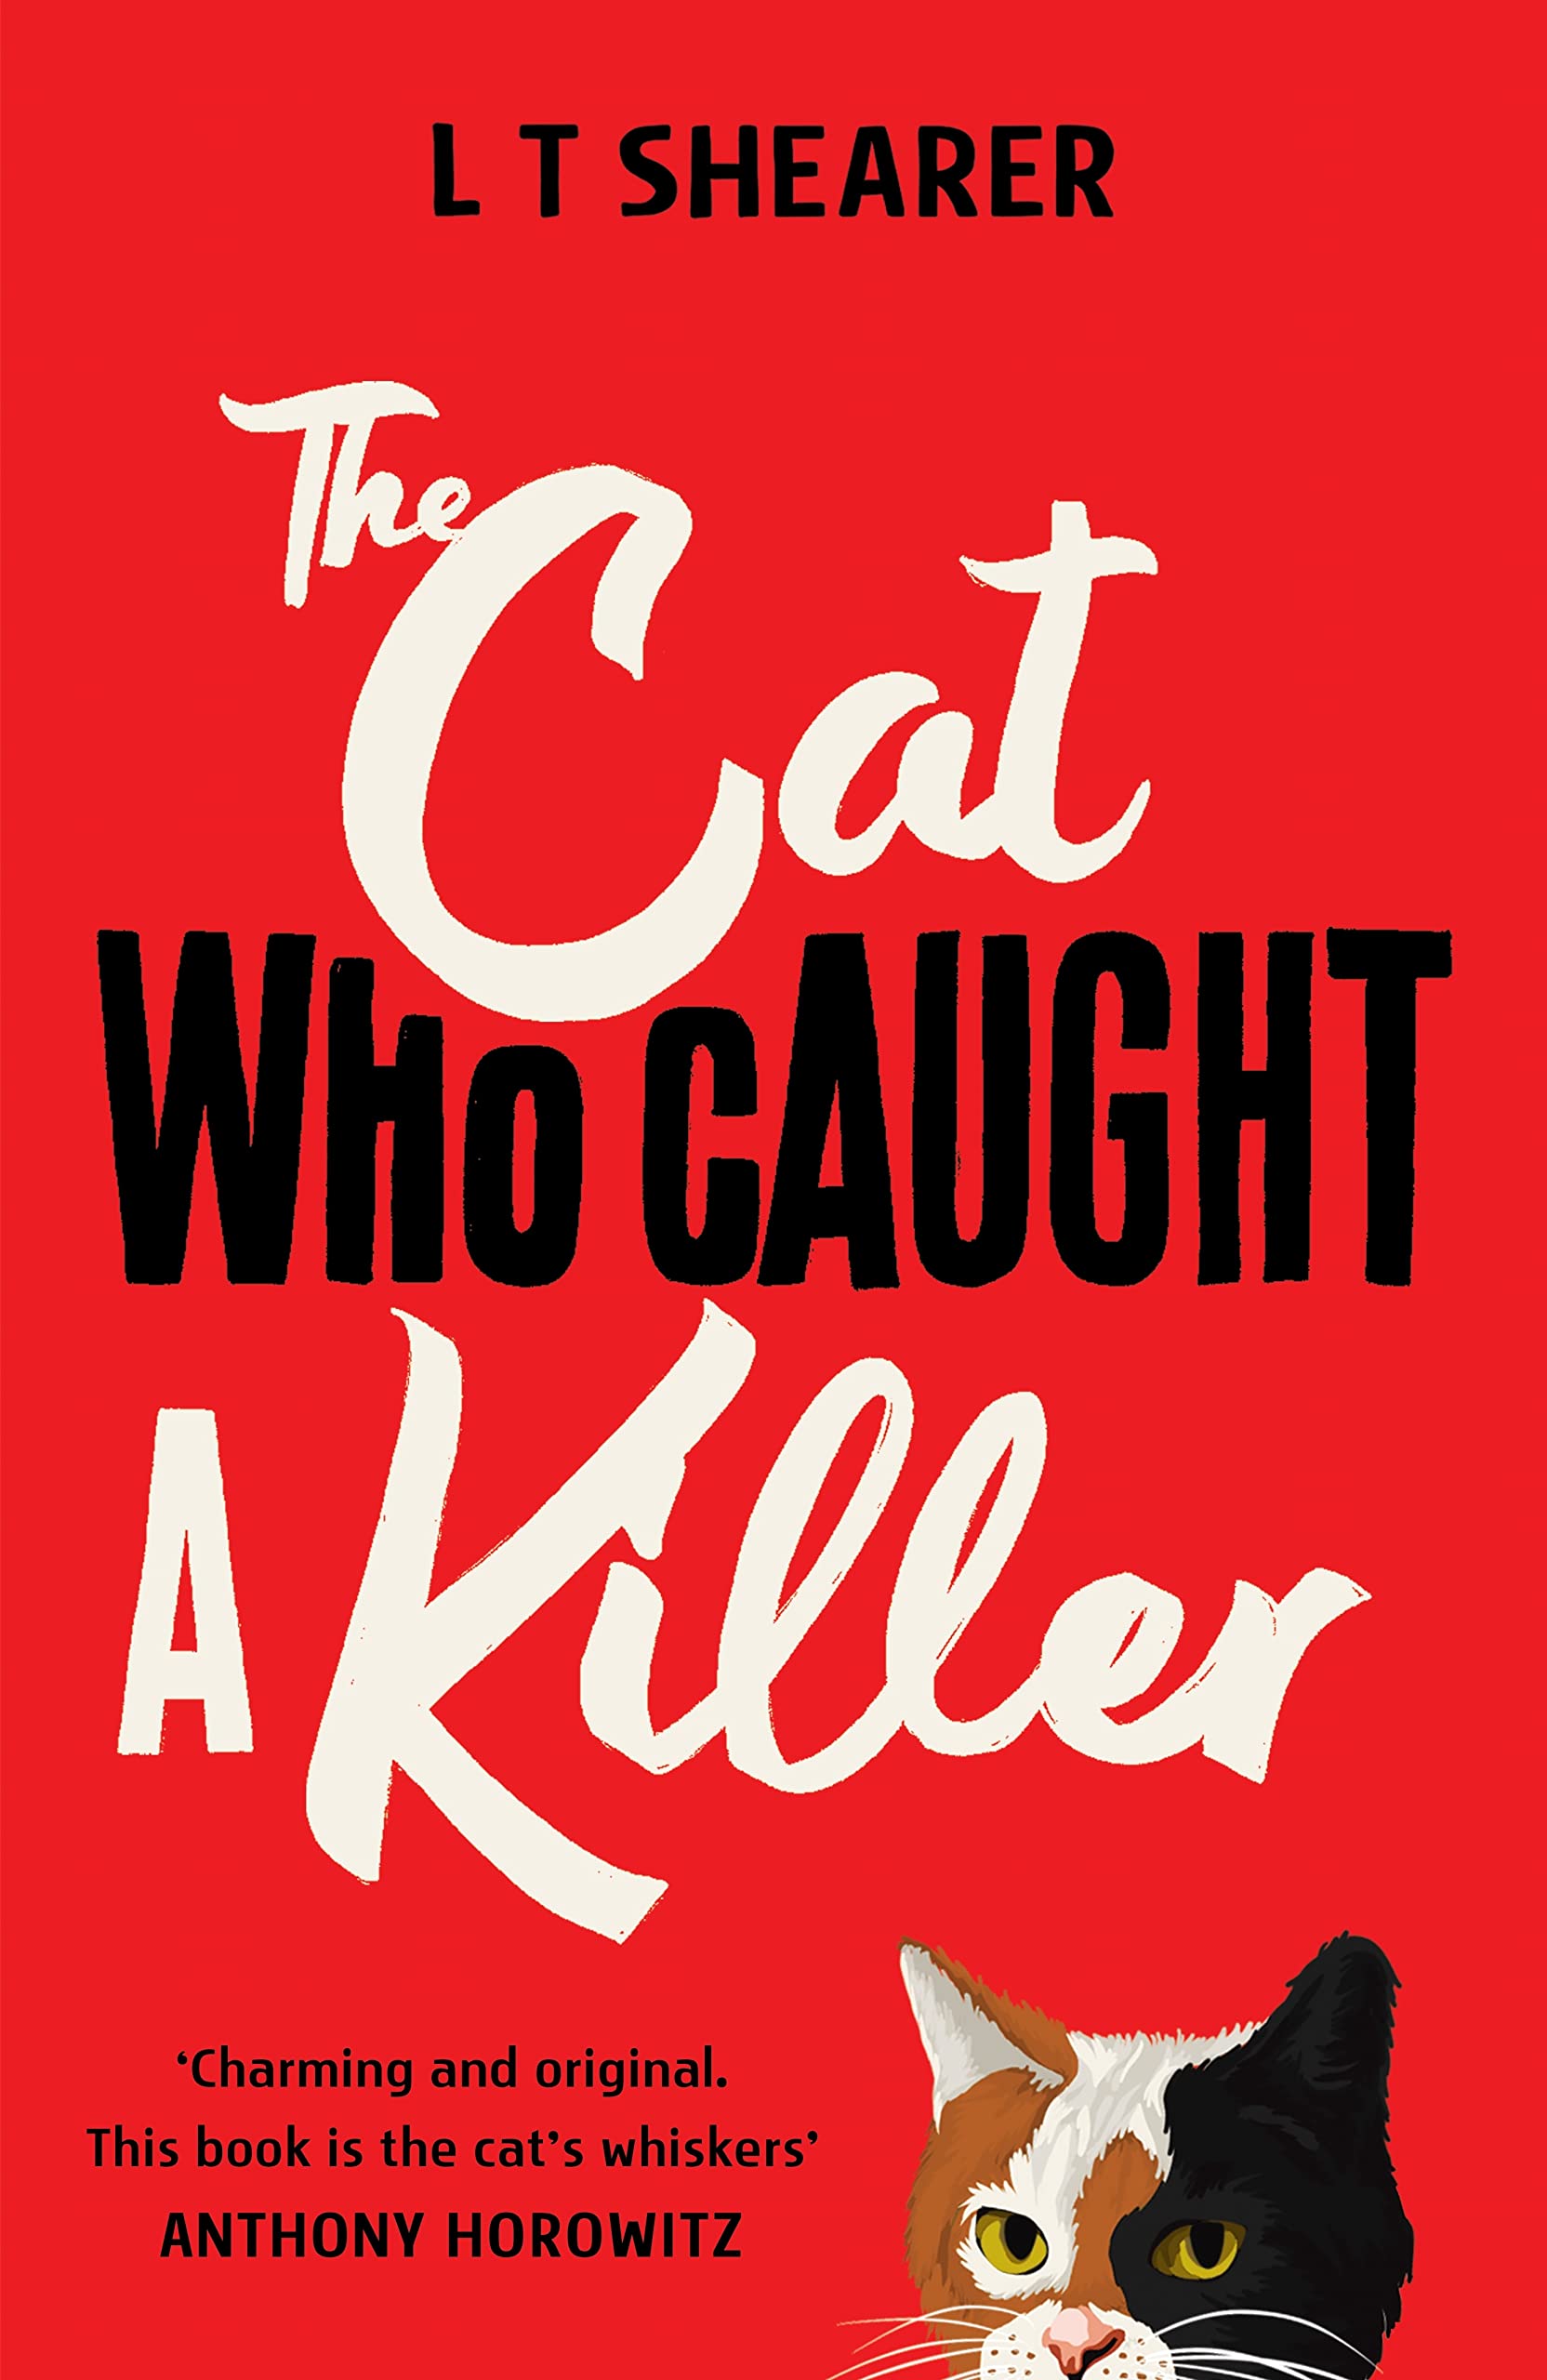 cat-who-caught-a-killer